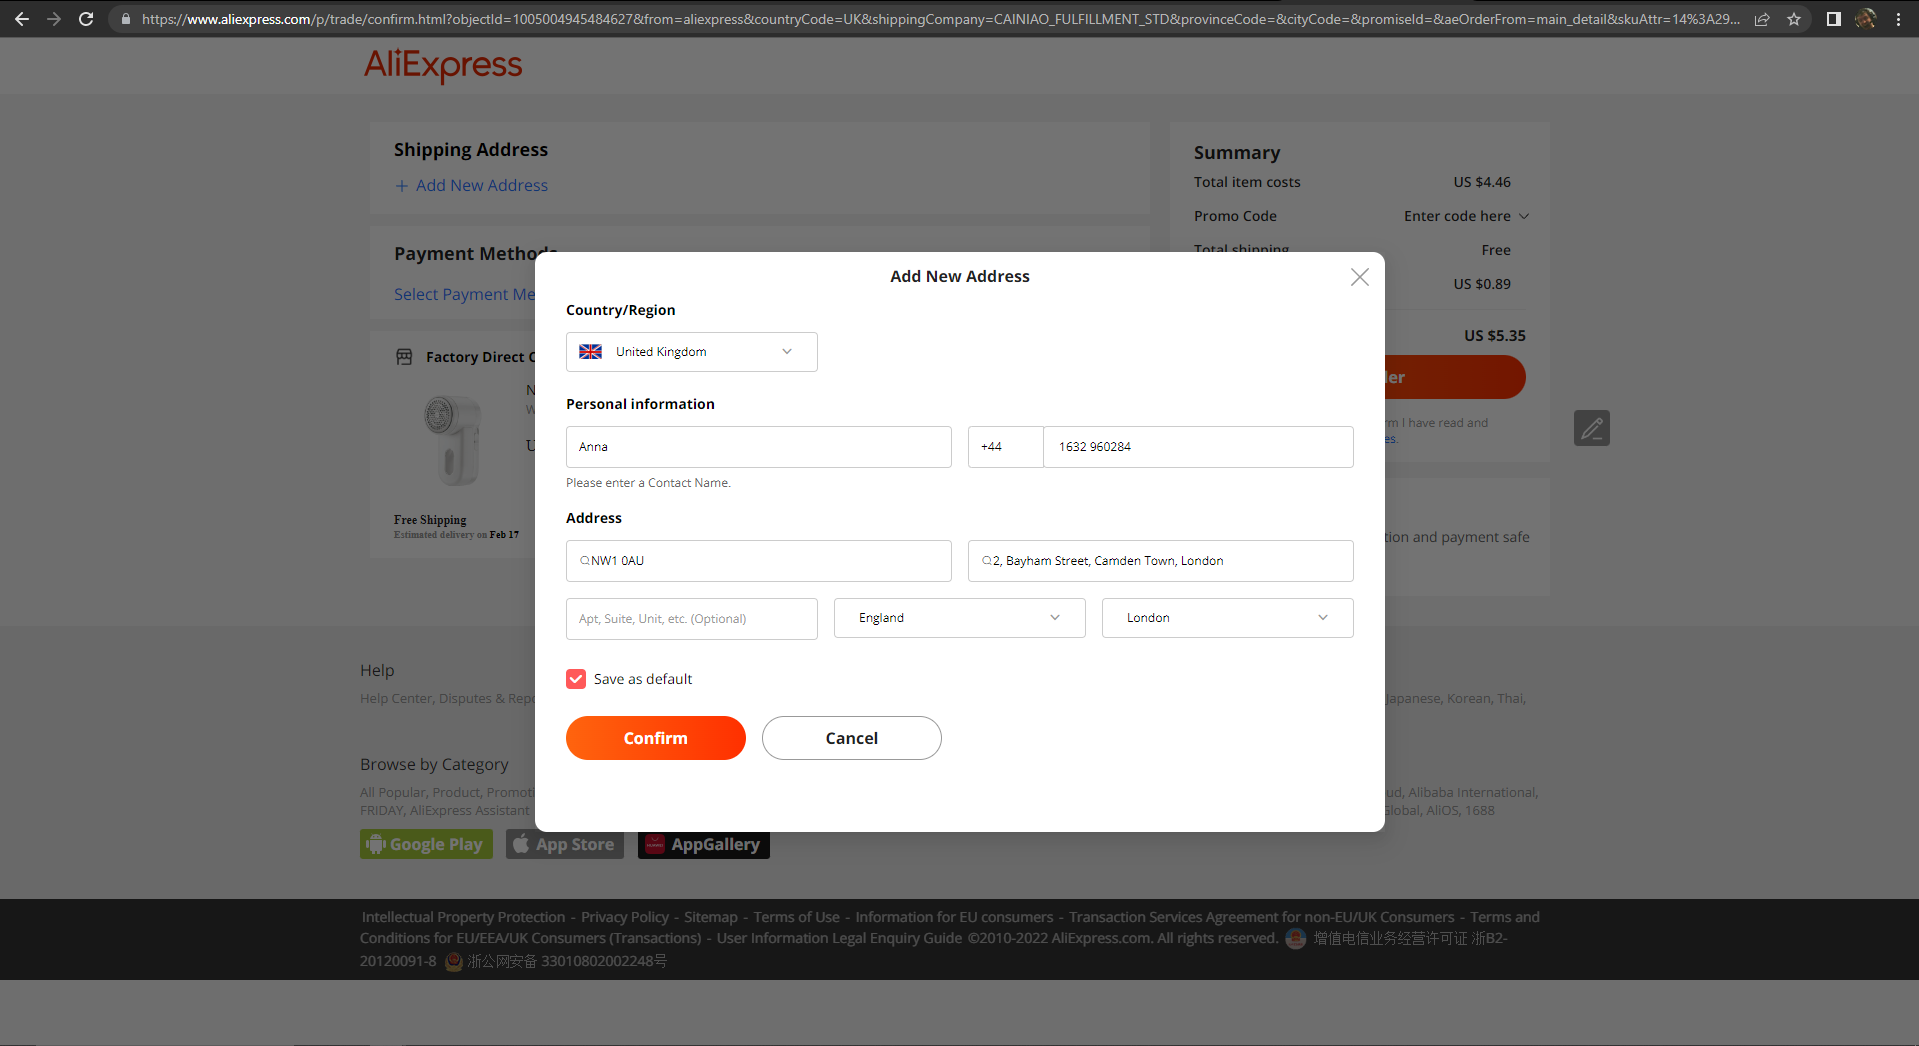 A correctly filled delivery form should look something like this: